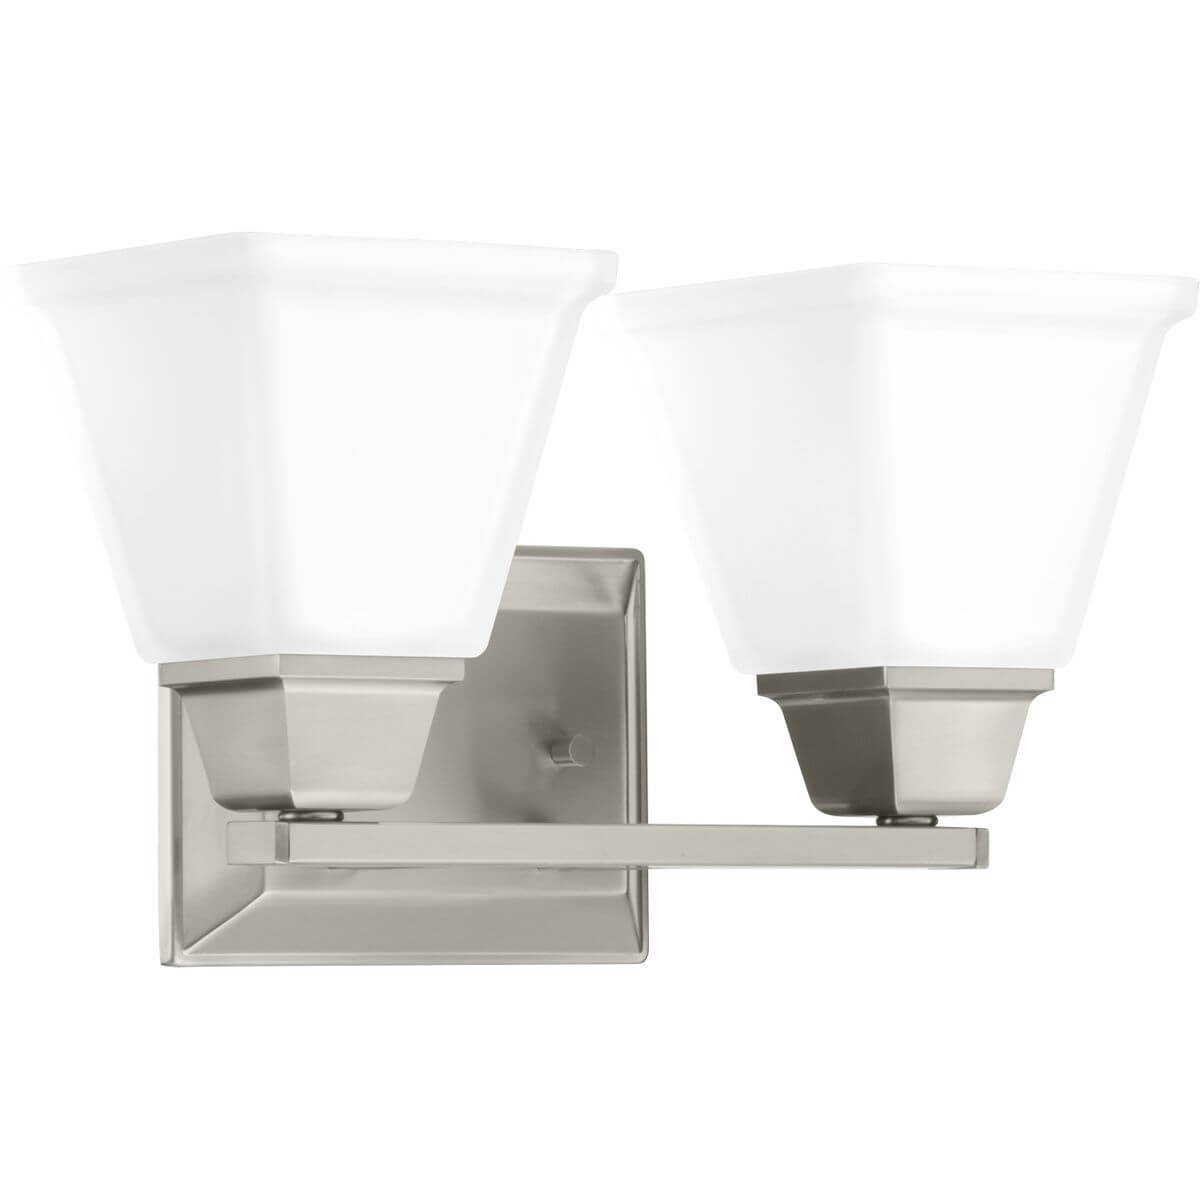 Progress Lighting Clifton Heights 2 Light 14 inch Bath Vanity Light in Brushed Nickel with Etched Glass P300159-009